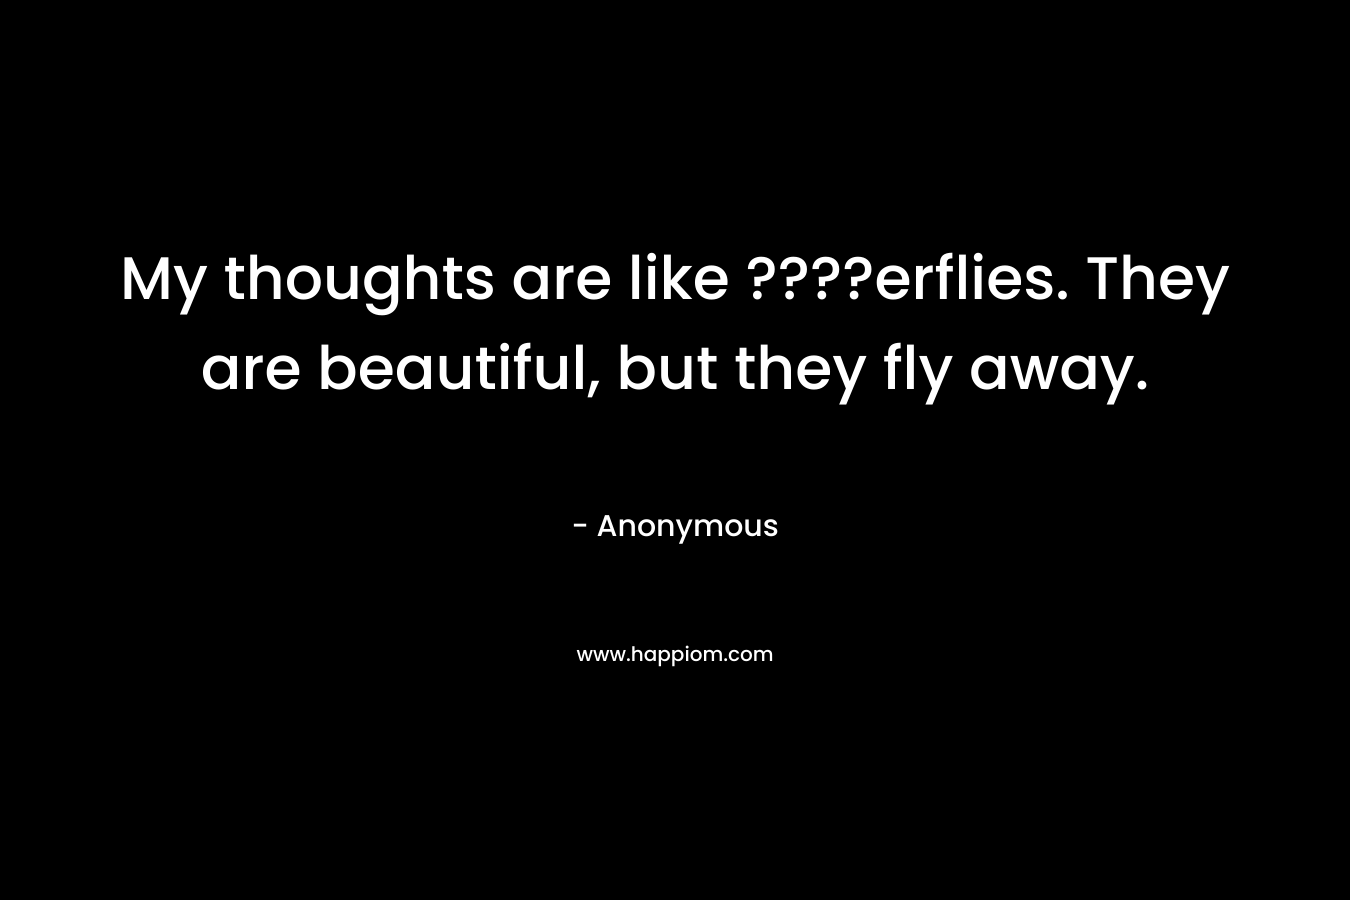 My thoughts are like ????erflies. They are beautiful, but they fly away.